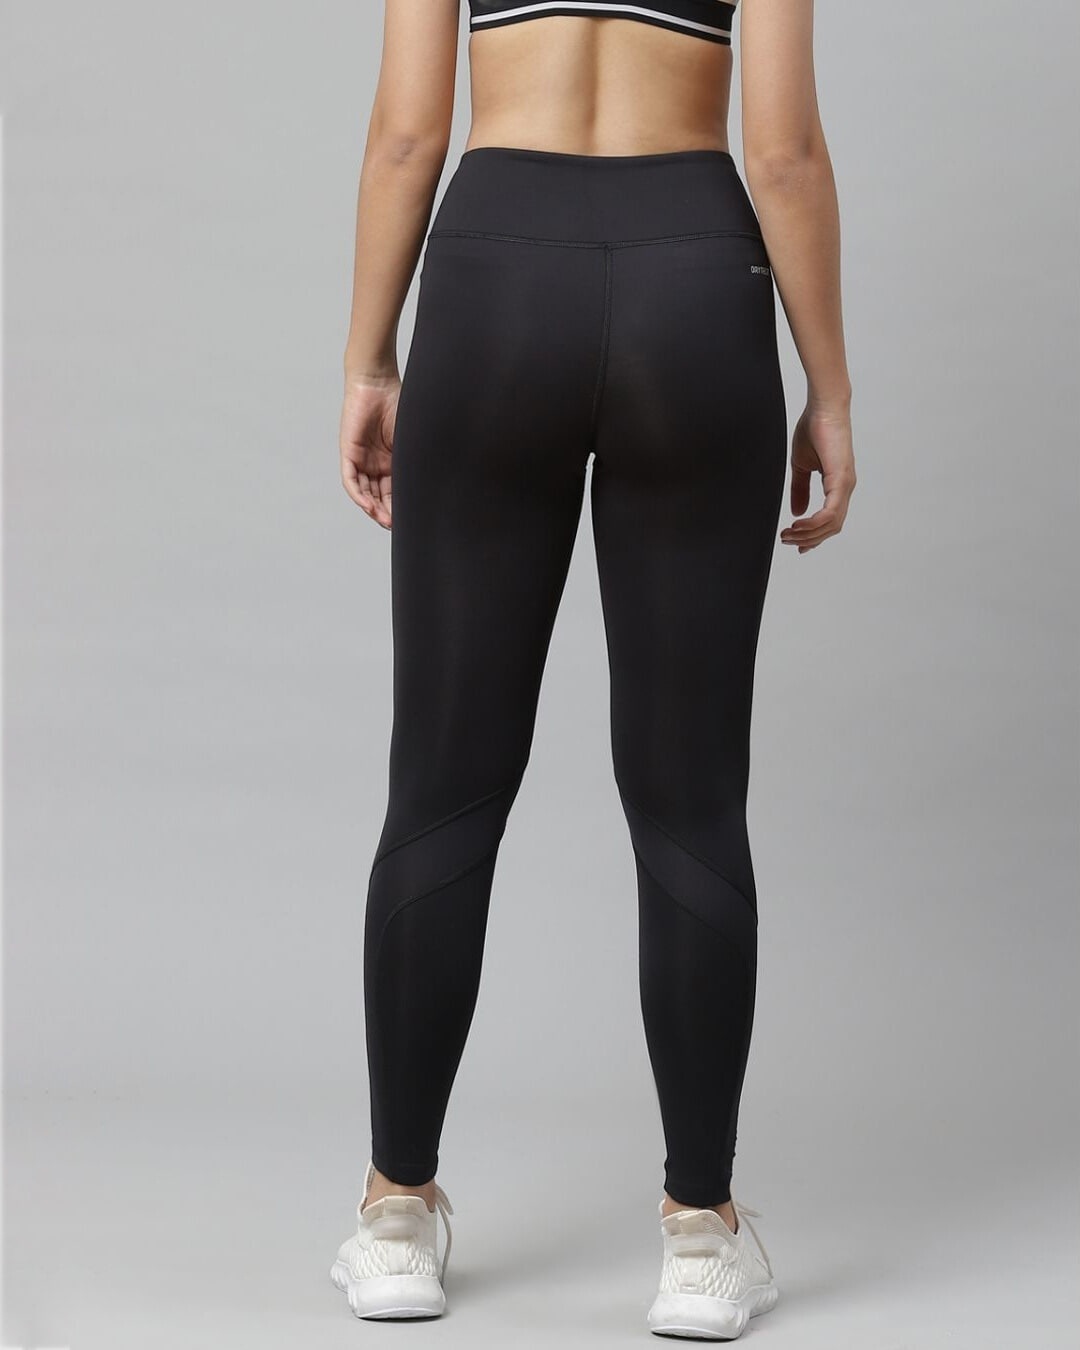 Shop Women's Black Sustainable Tights